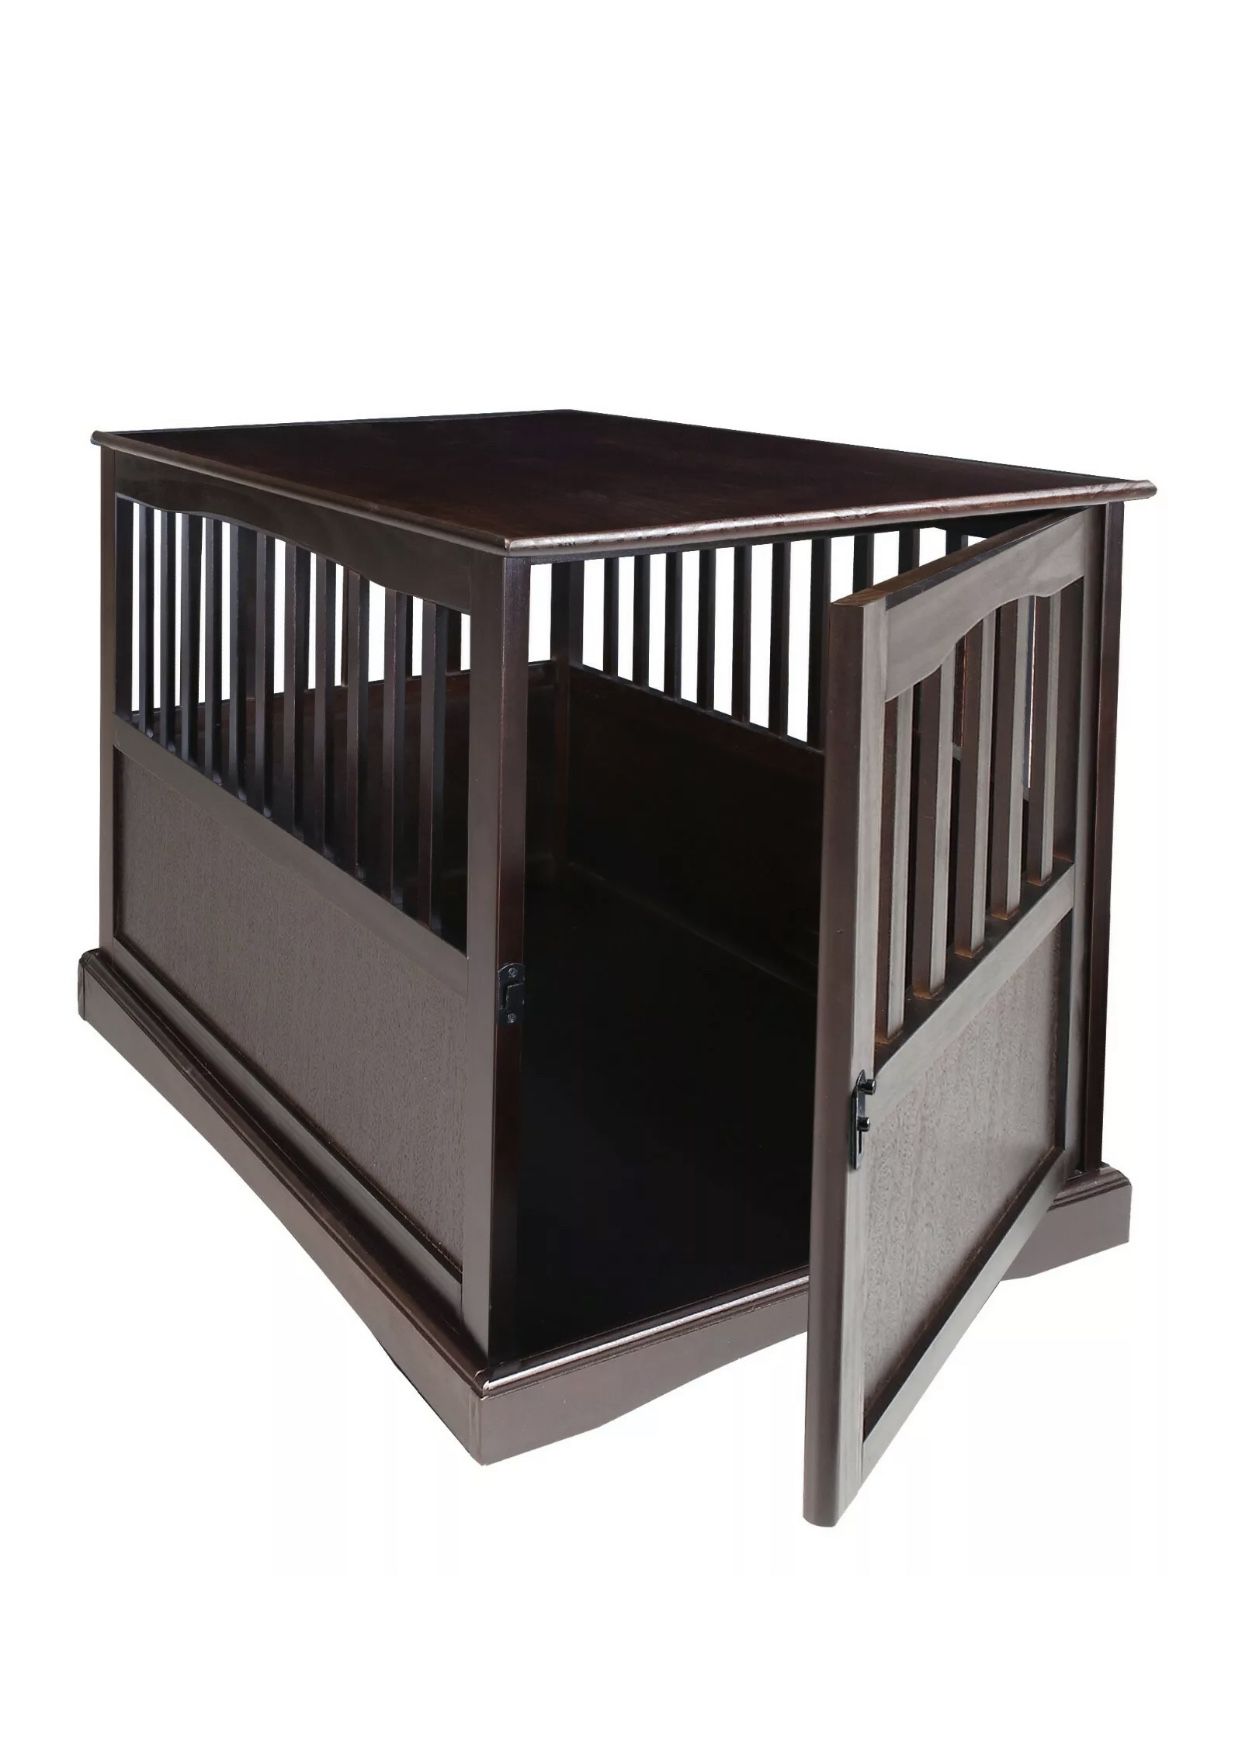 XL dog crate/end table